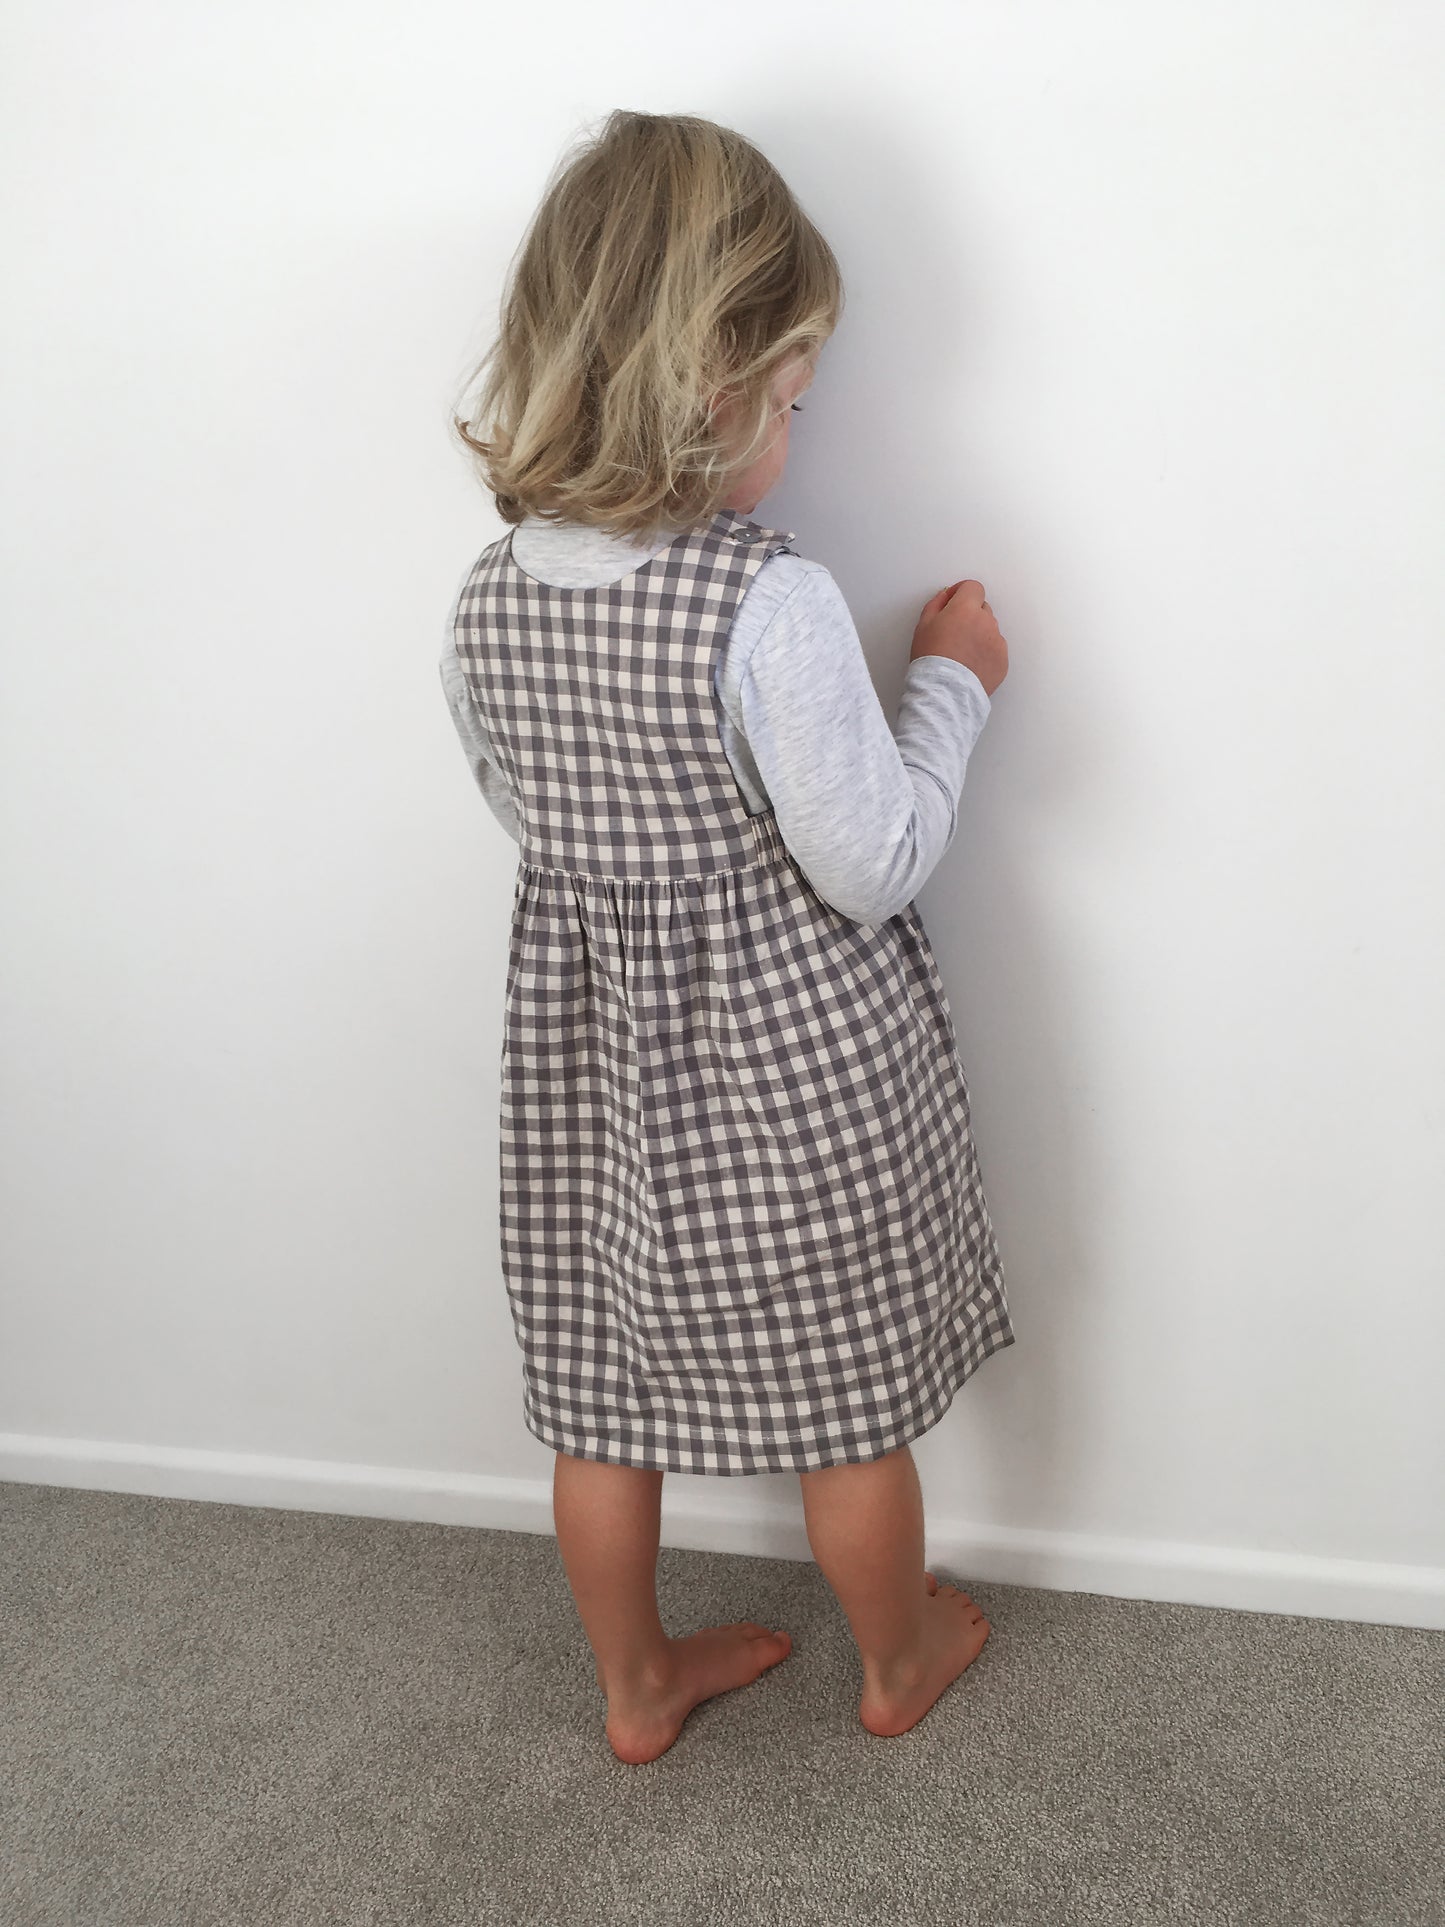 A small girl scratching a pristine white wall with a scrunched up easter egg wrapper. Wears a gingham linen pinafore over a light grey long sleeved tee.